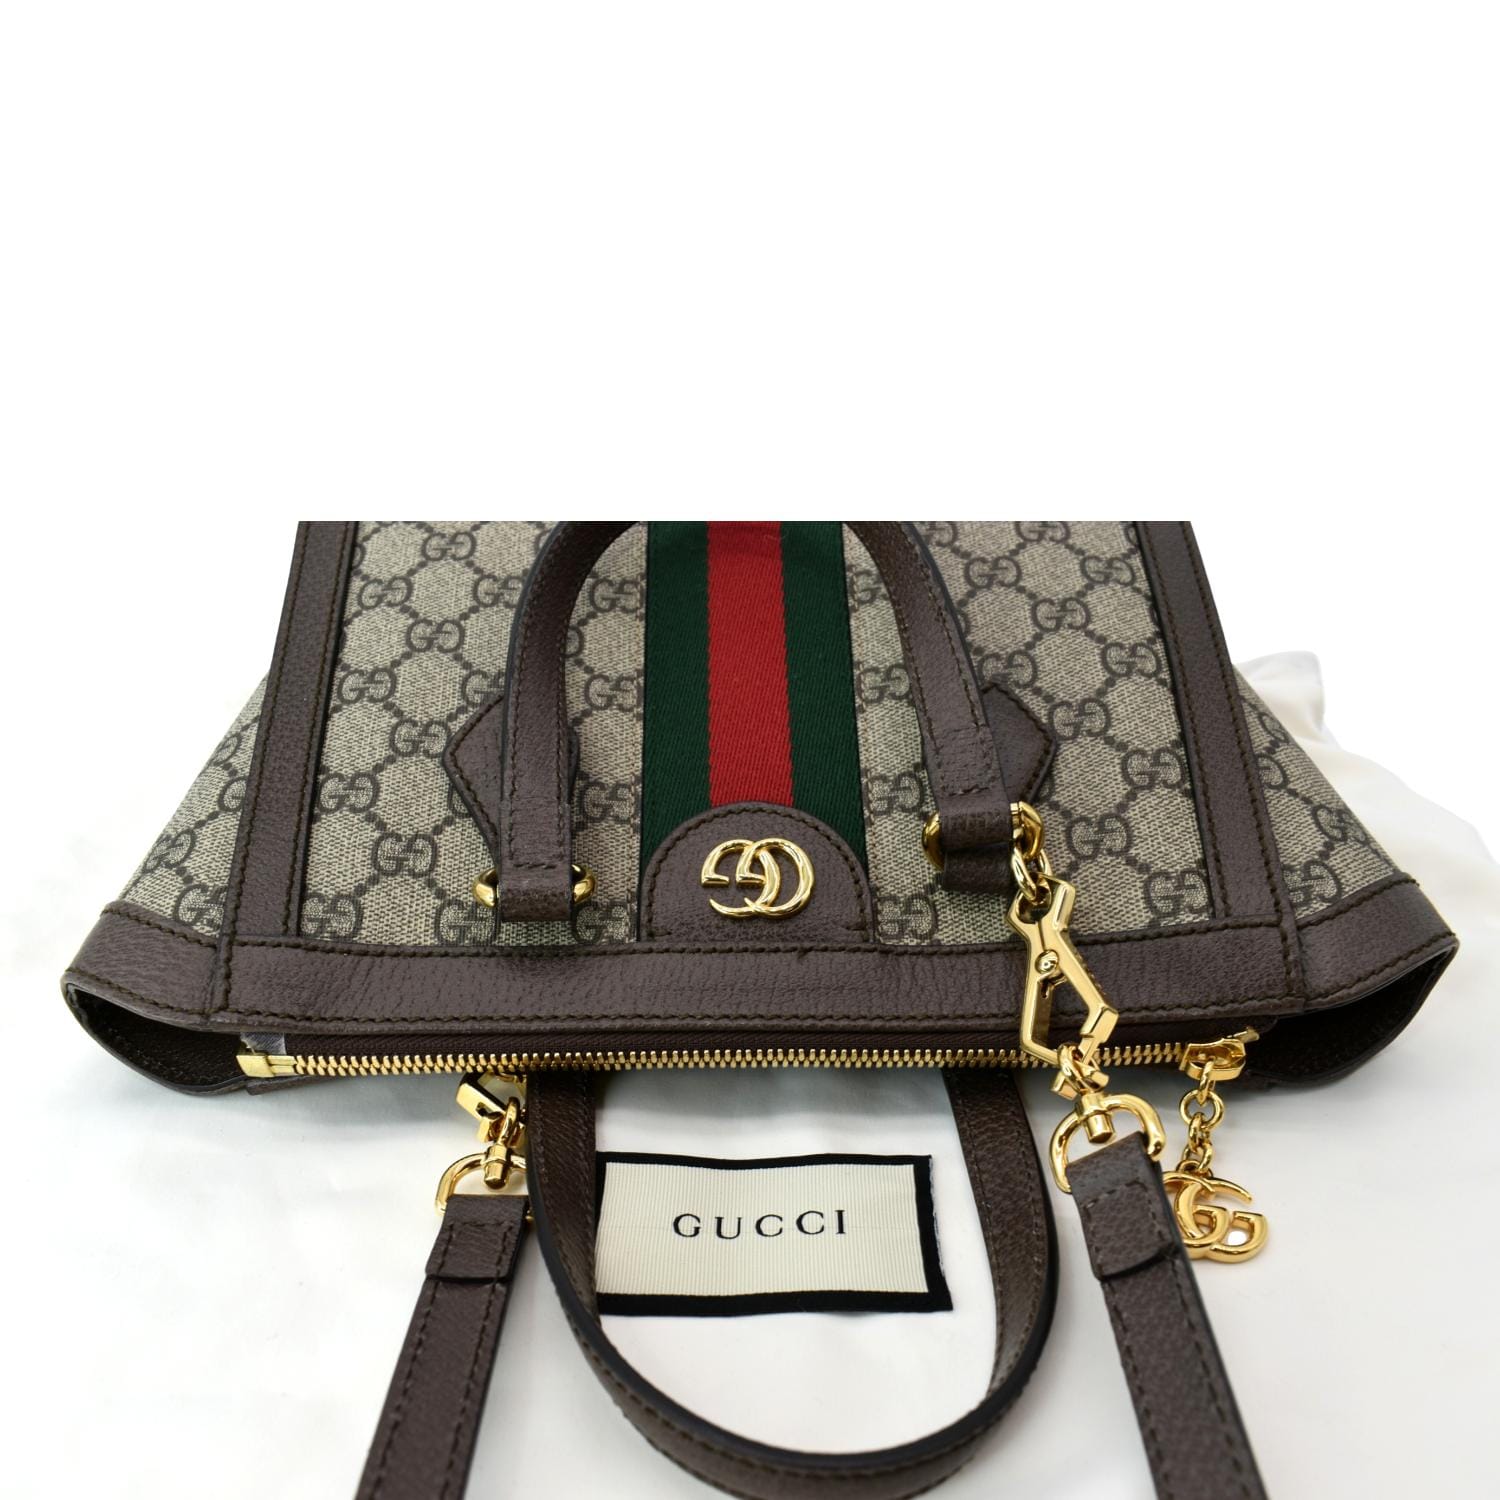 Gucci Ophidia Tote Review **No Unnecessary Chatter** 